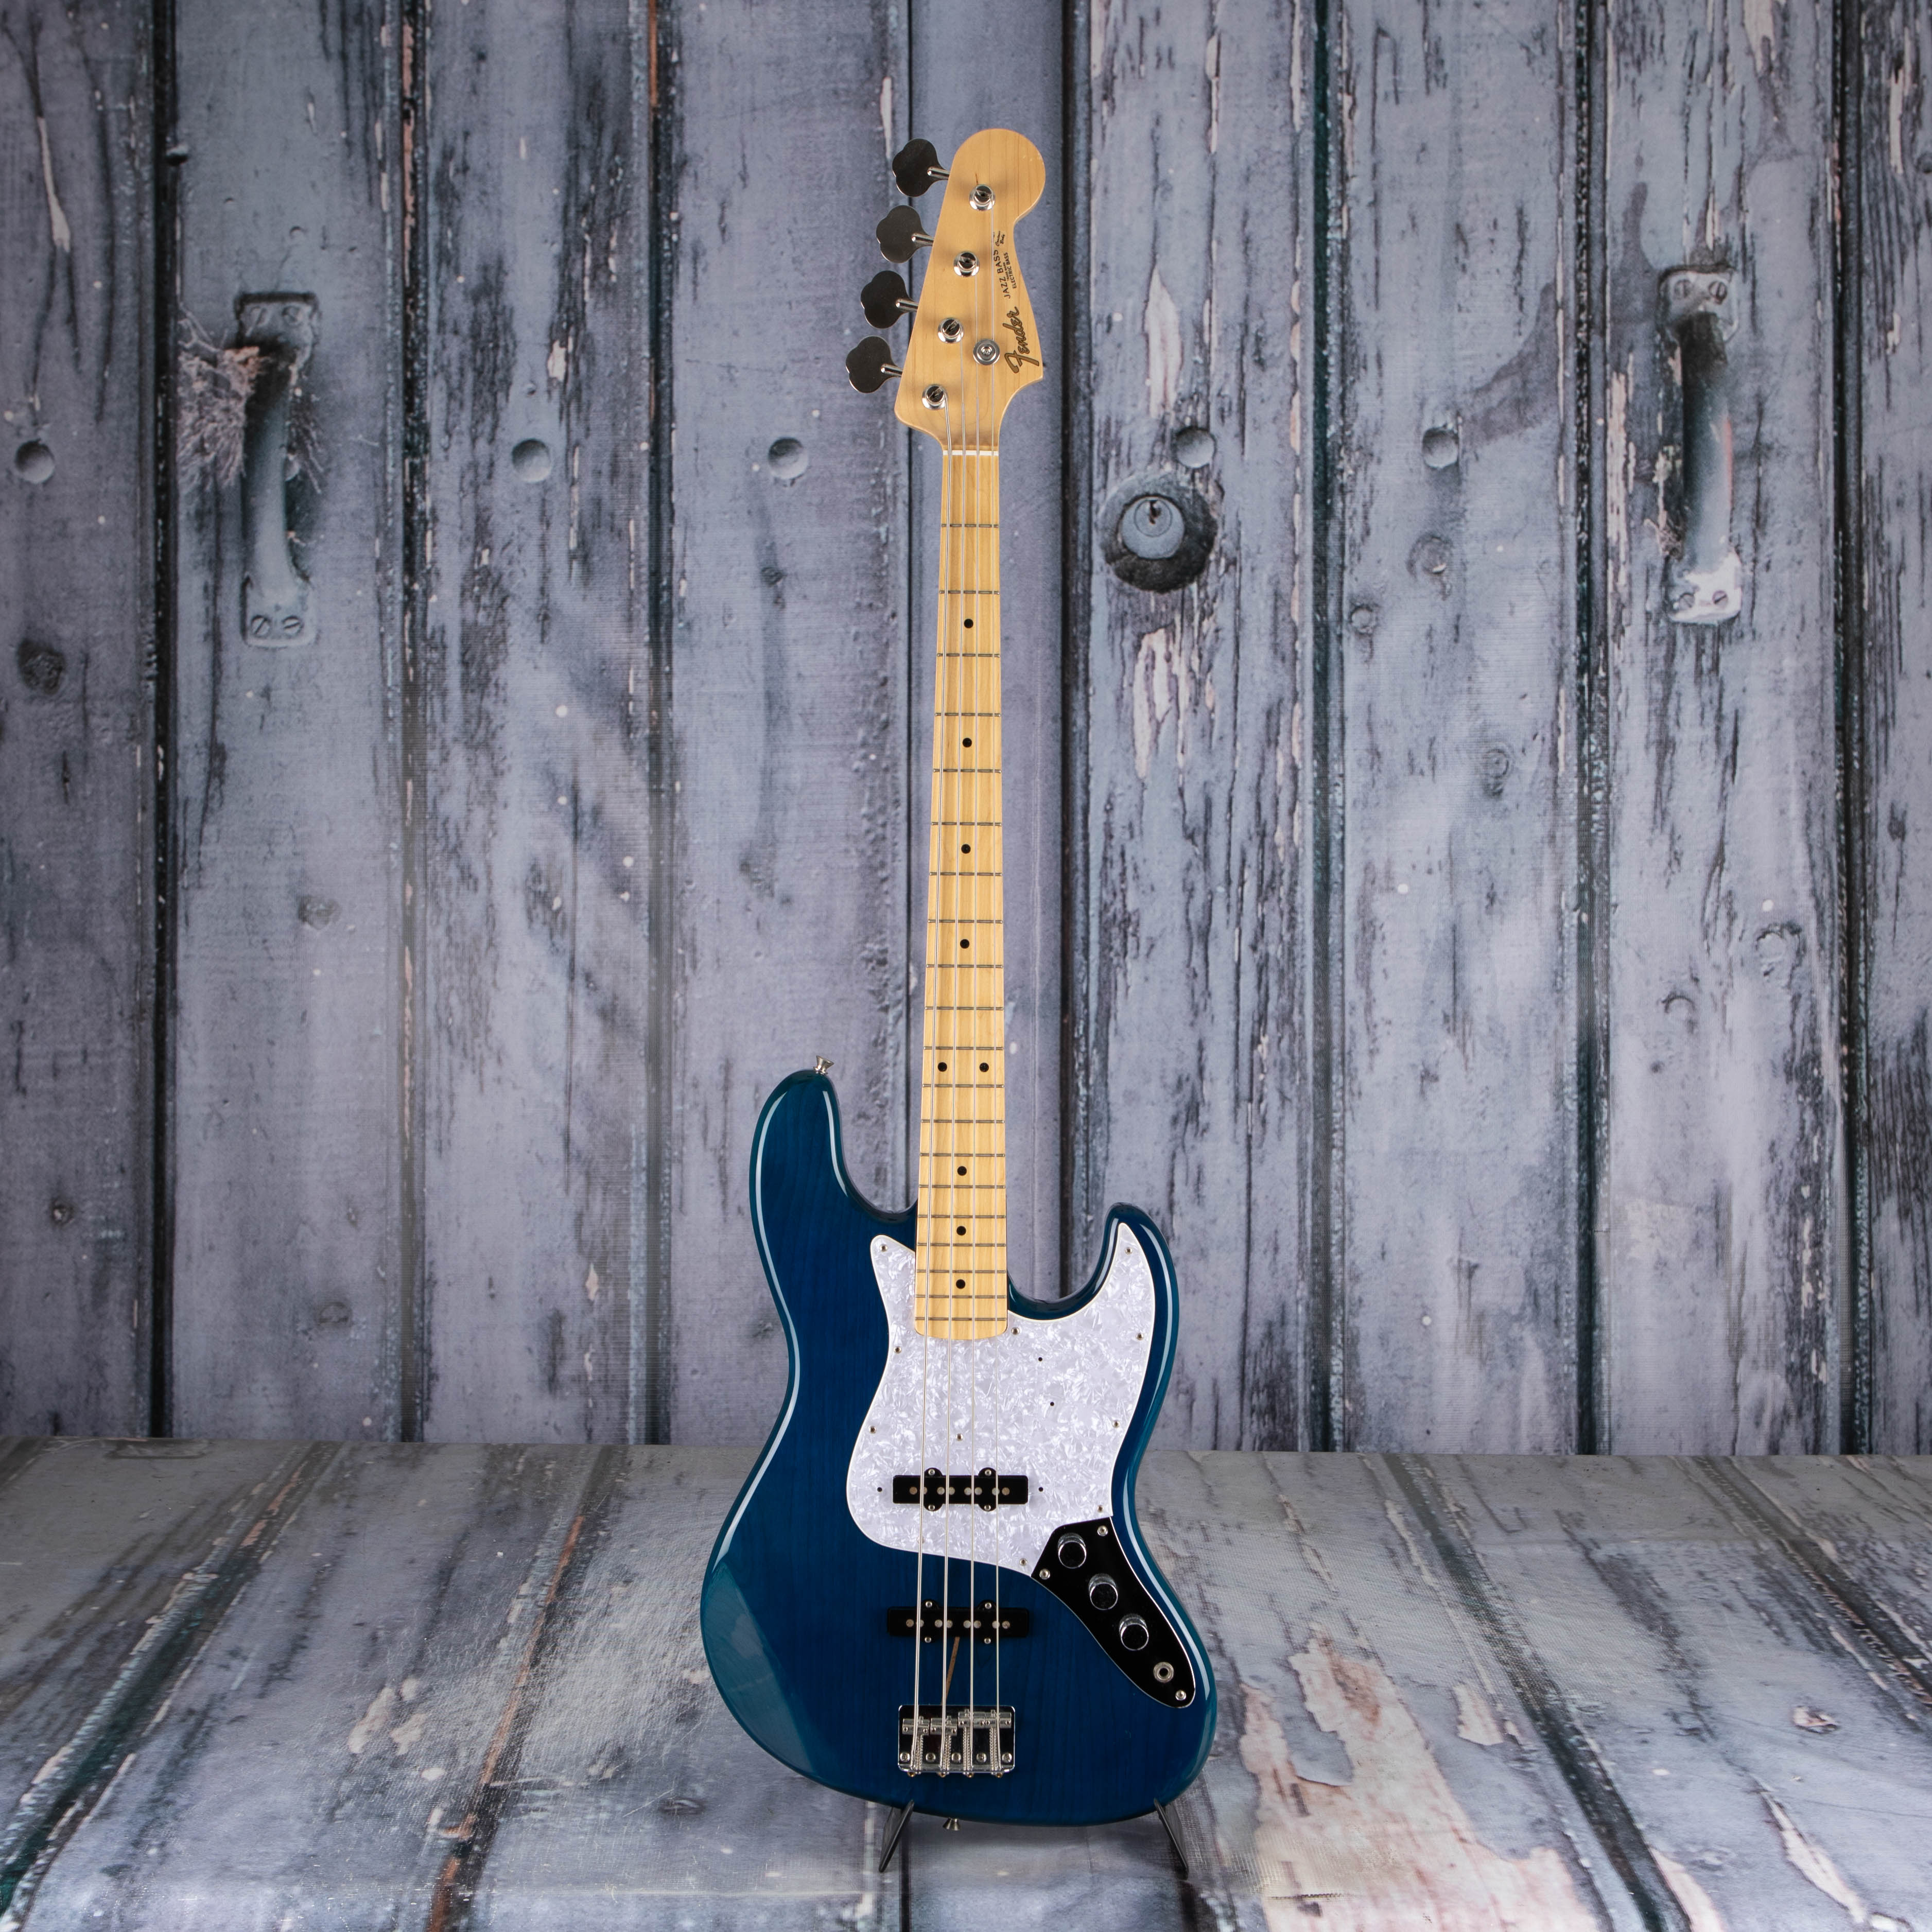 Used 1997 Fender Jazz Bass, Charcoal Marine | For Sale | Replay 